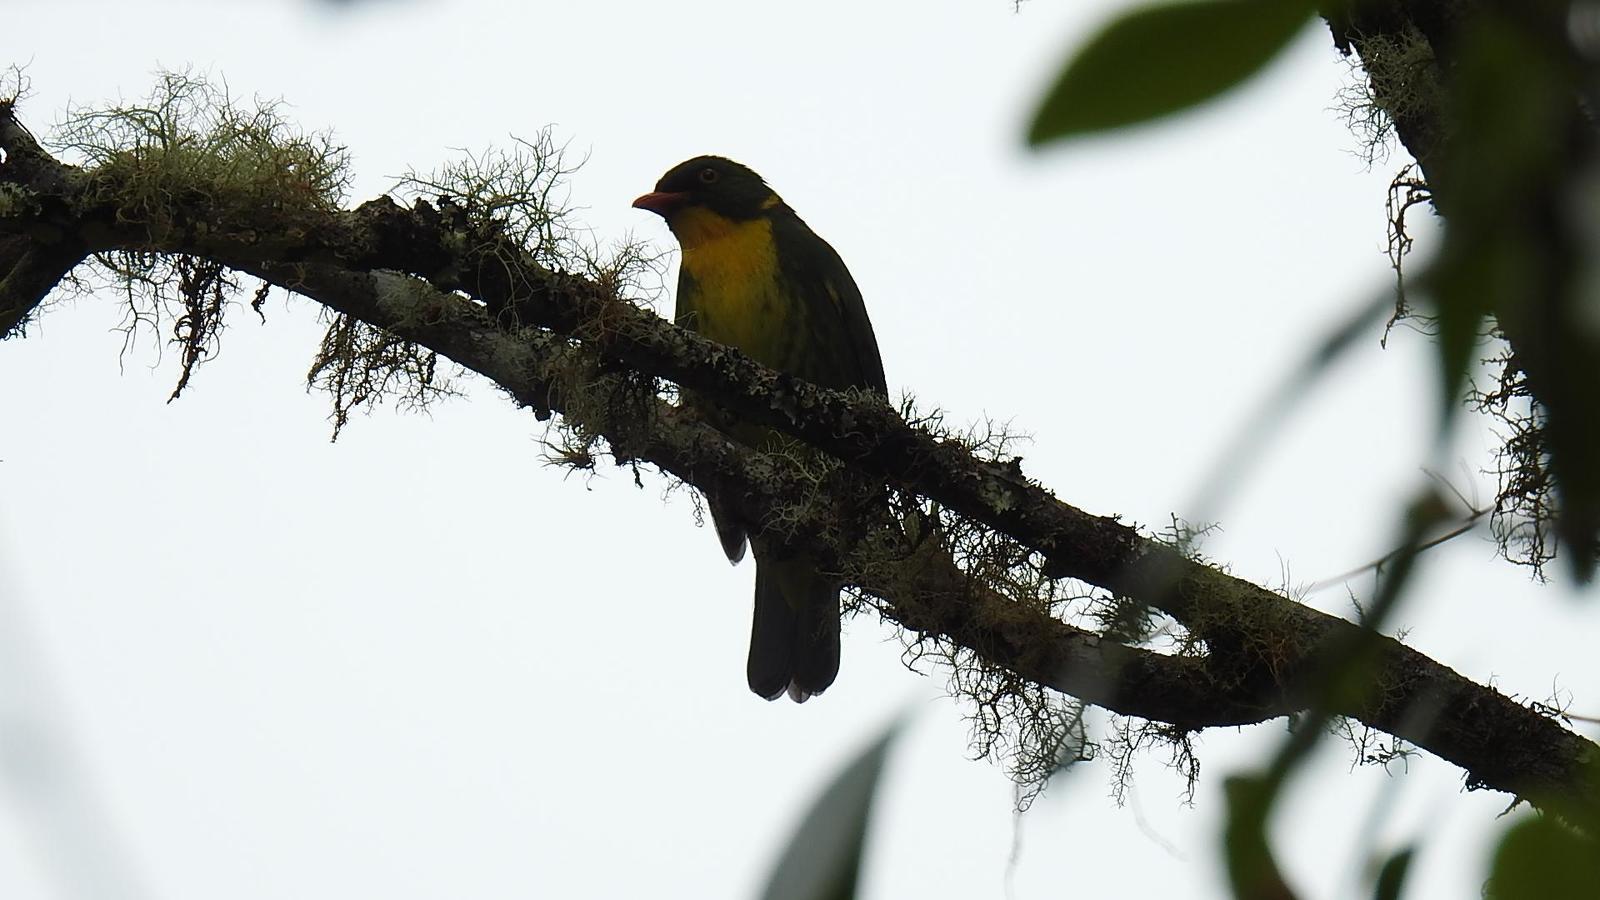 Golden-breasted Fruiteater Photo by Julio Delgado